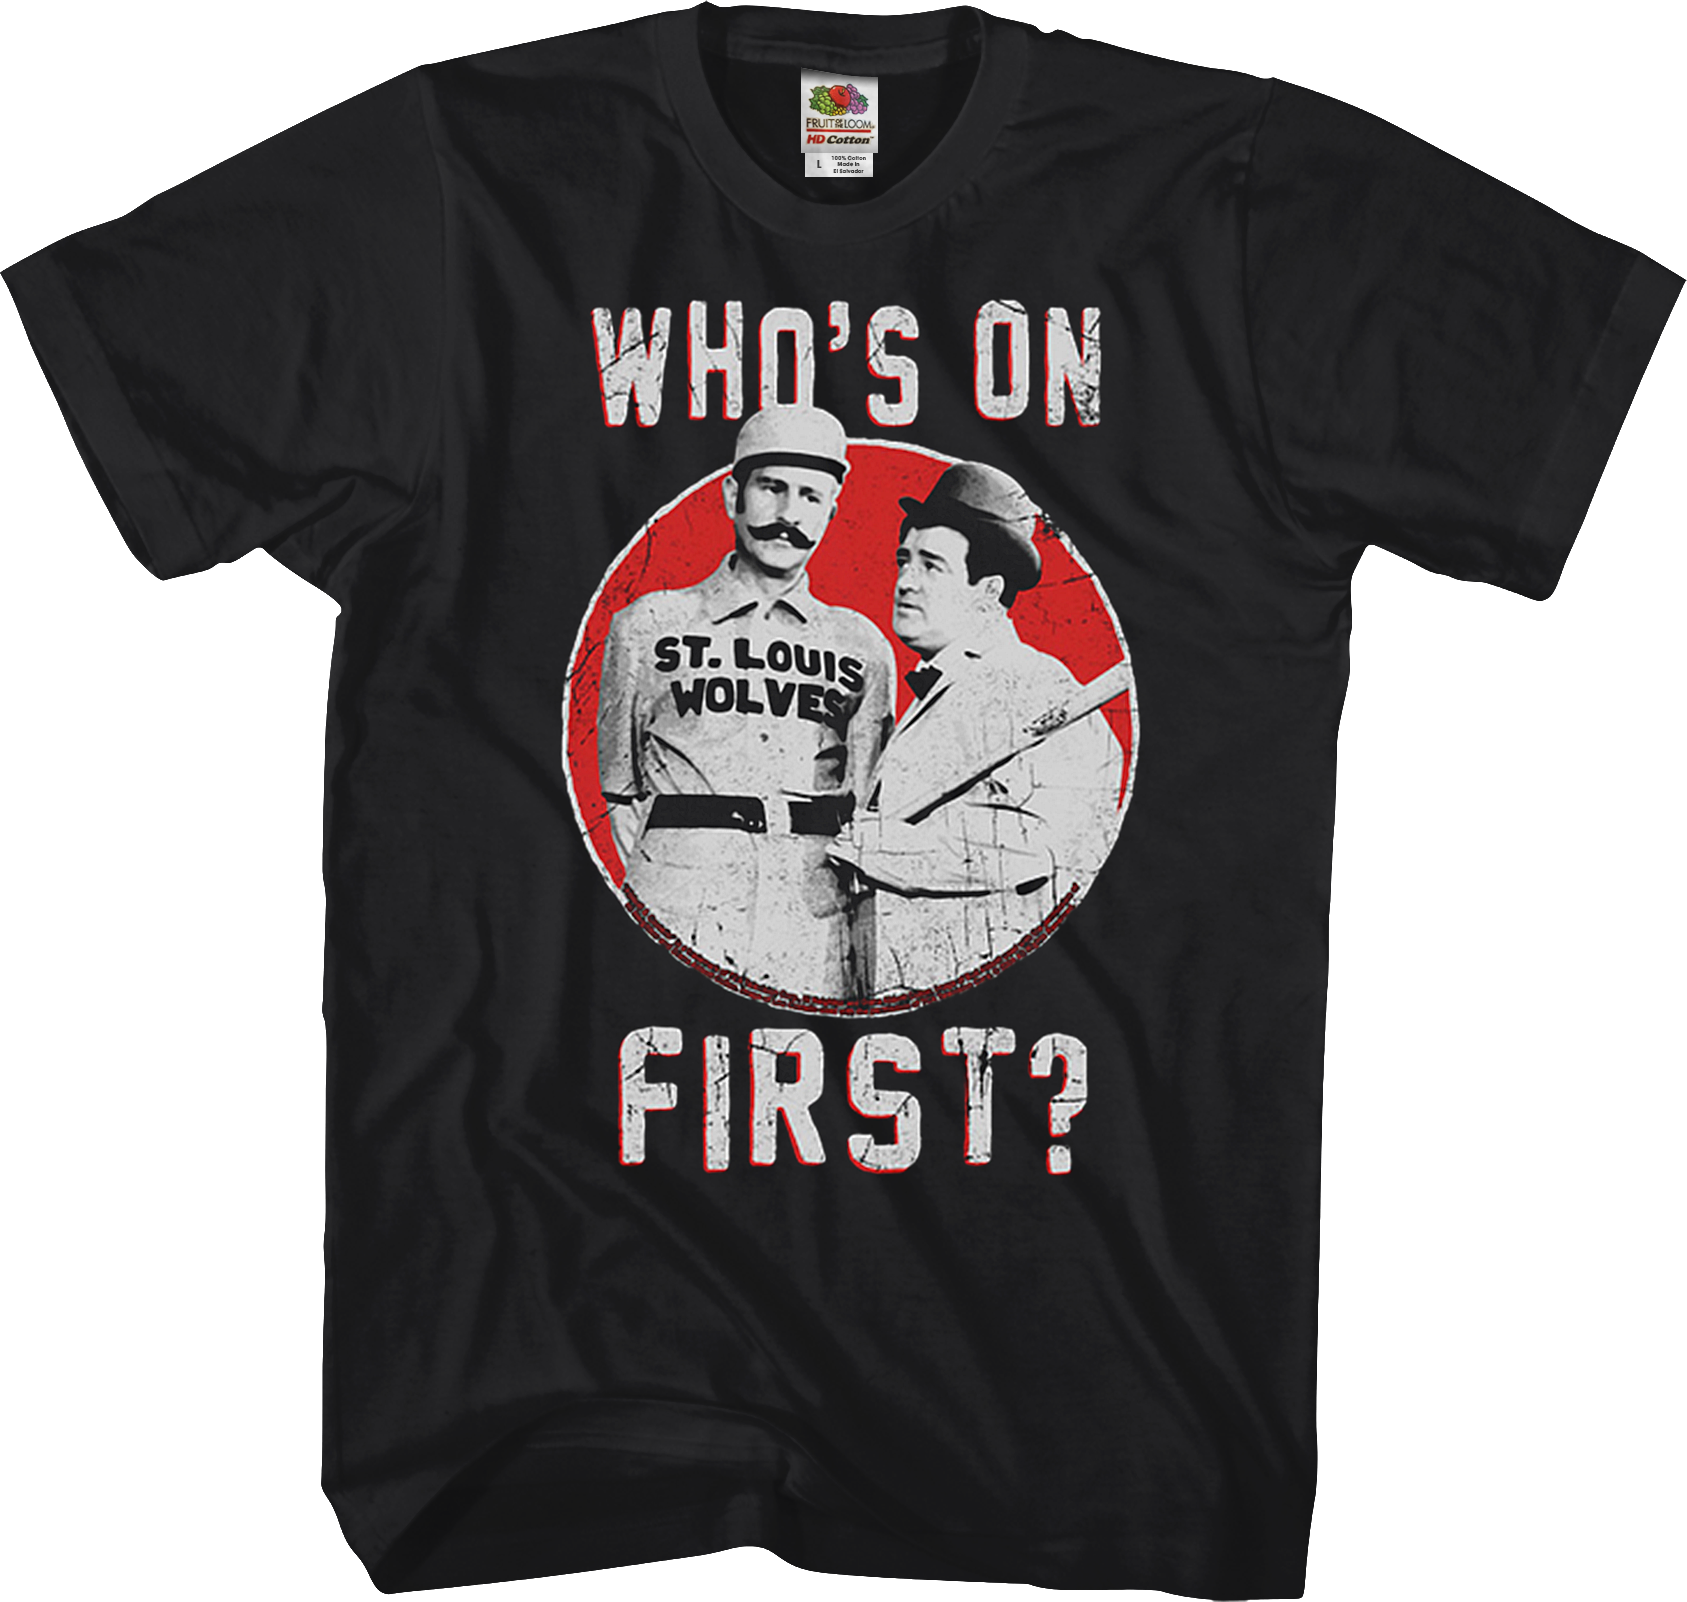 whos on first abbott and costello t shirt 1787 arl7c